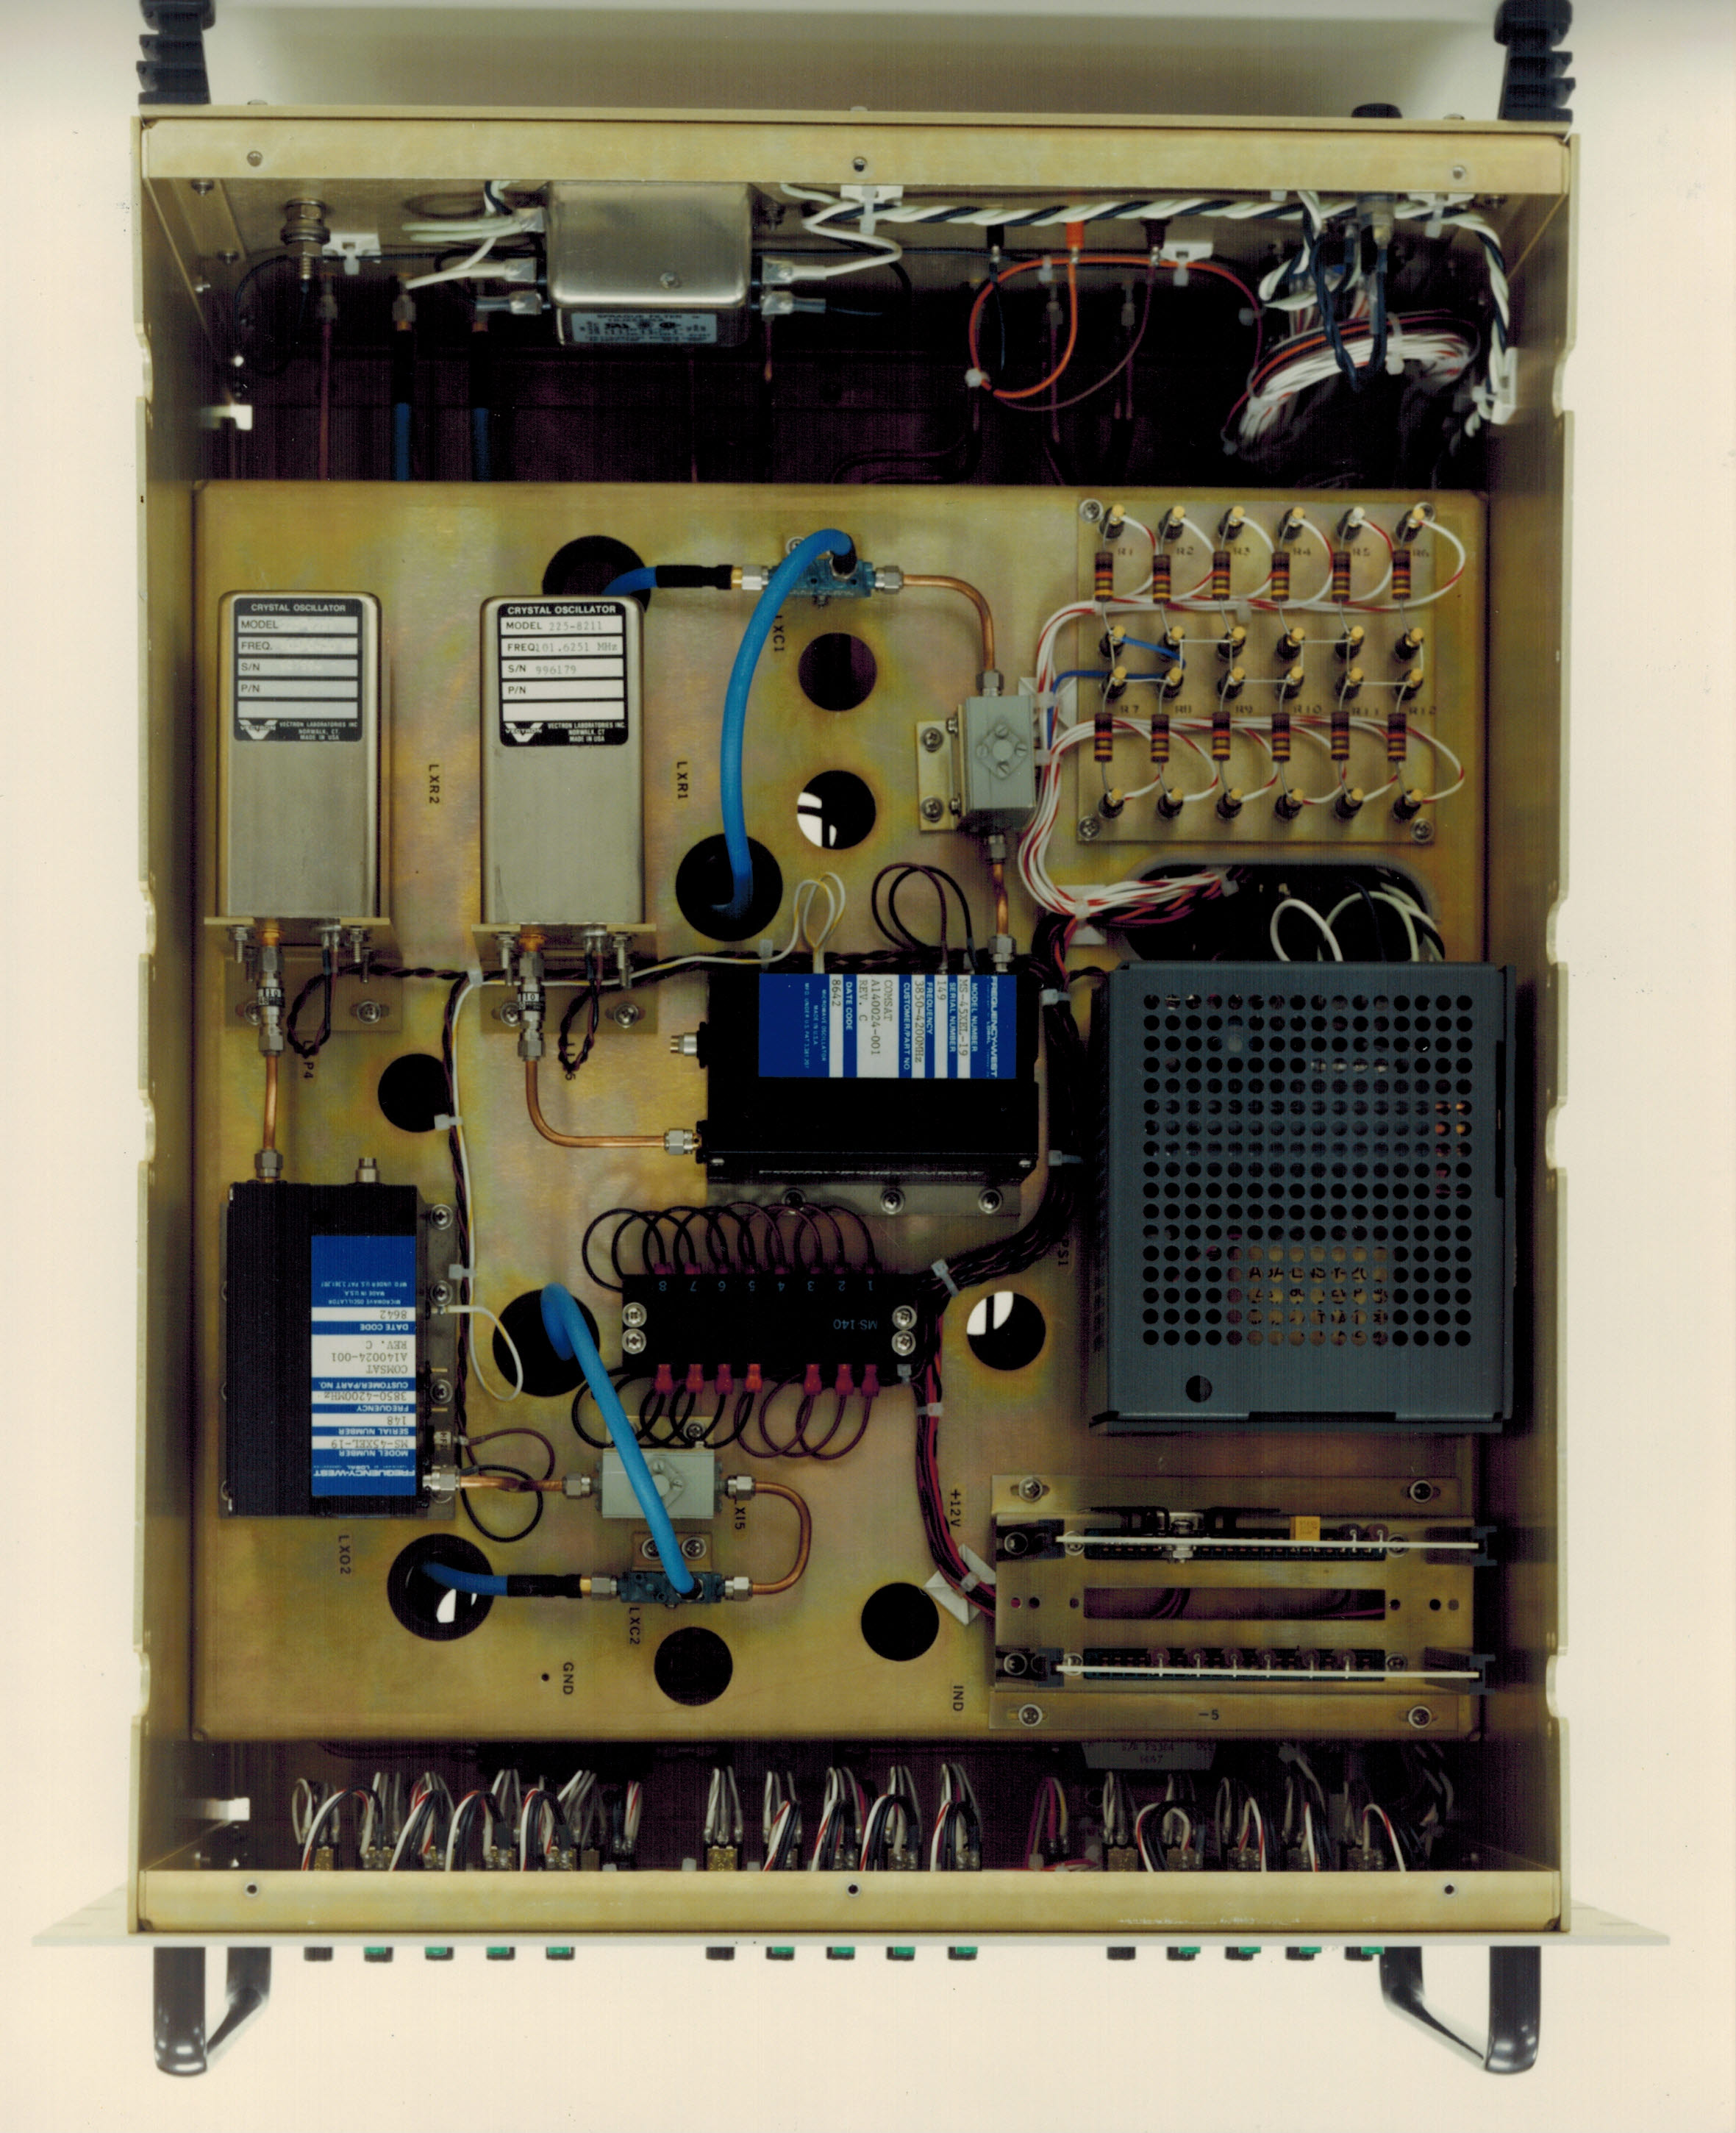 LBR_Signal_Control_Chassis_Top_View.jpg